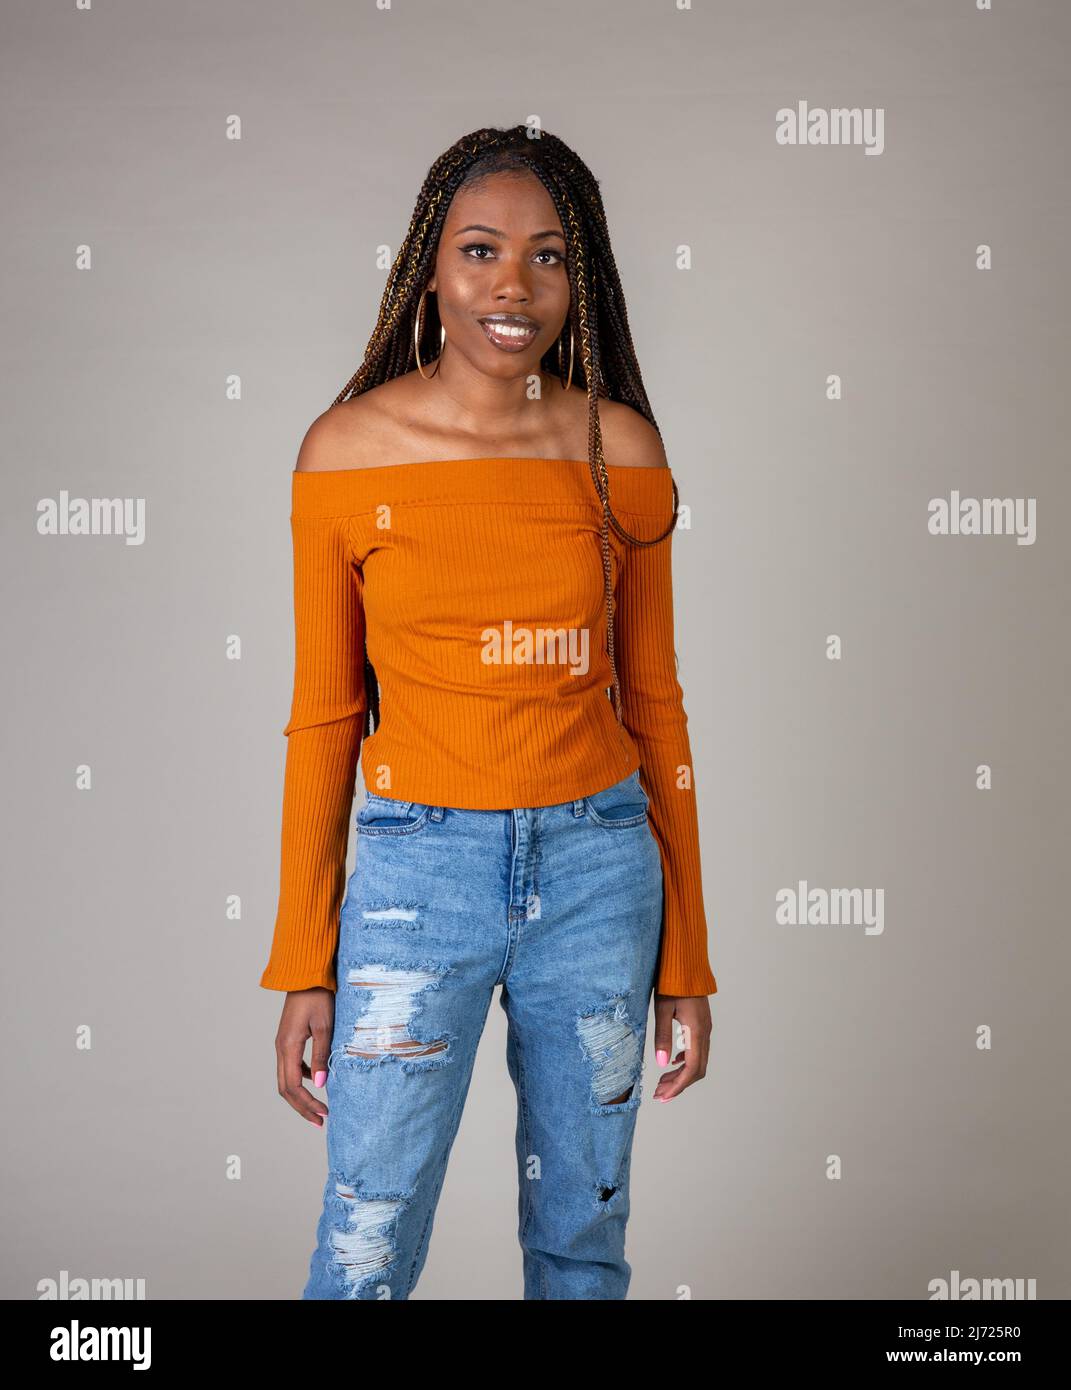 Young Woman Posing Crop Top Jeans Stock Photo 213546460 | Shutterstock